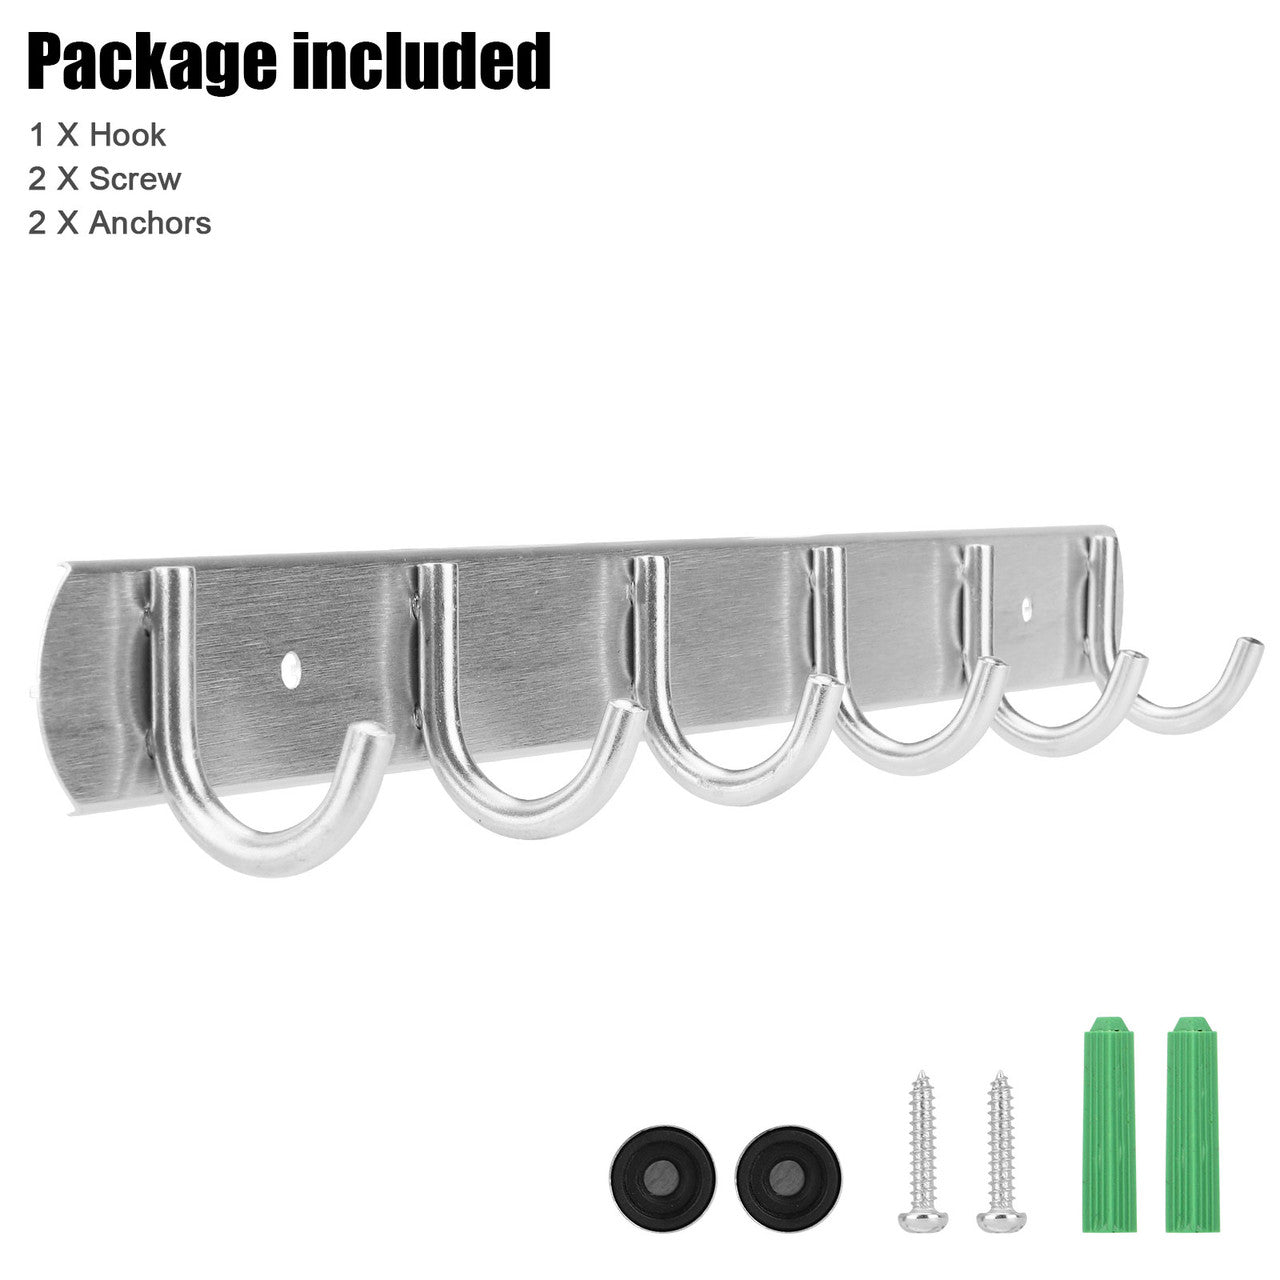 Wall Mounted 6-Hooks Rack Chrome Finish for Home, Bedroom, Bathroom, Kitchen